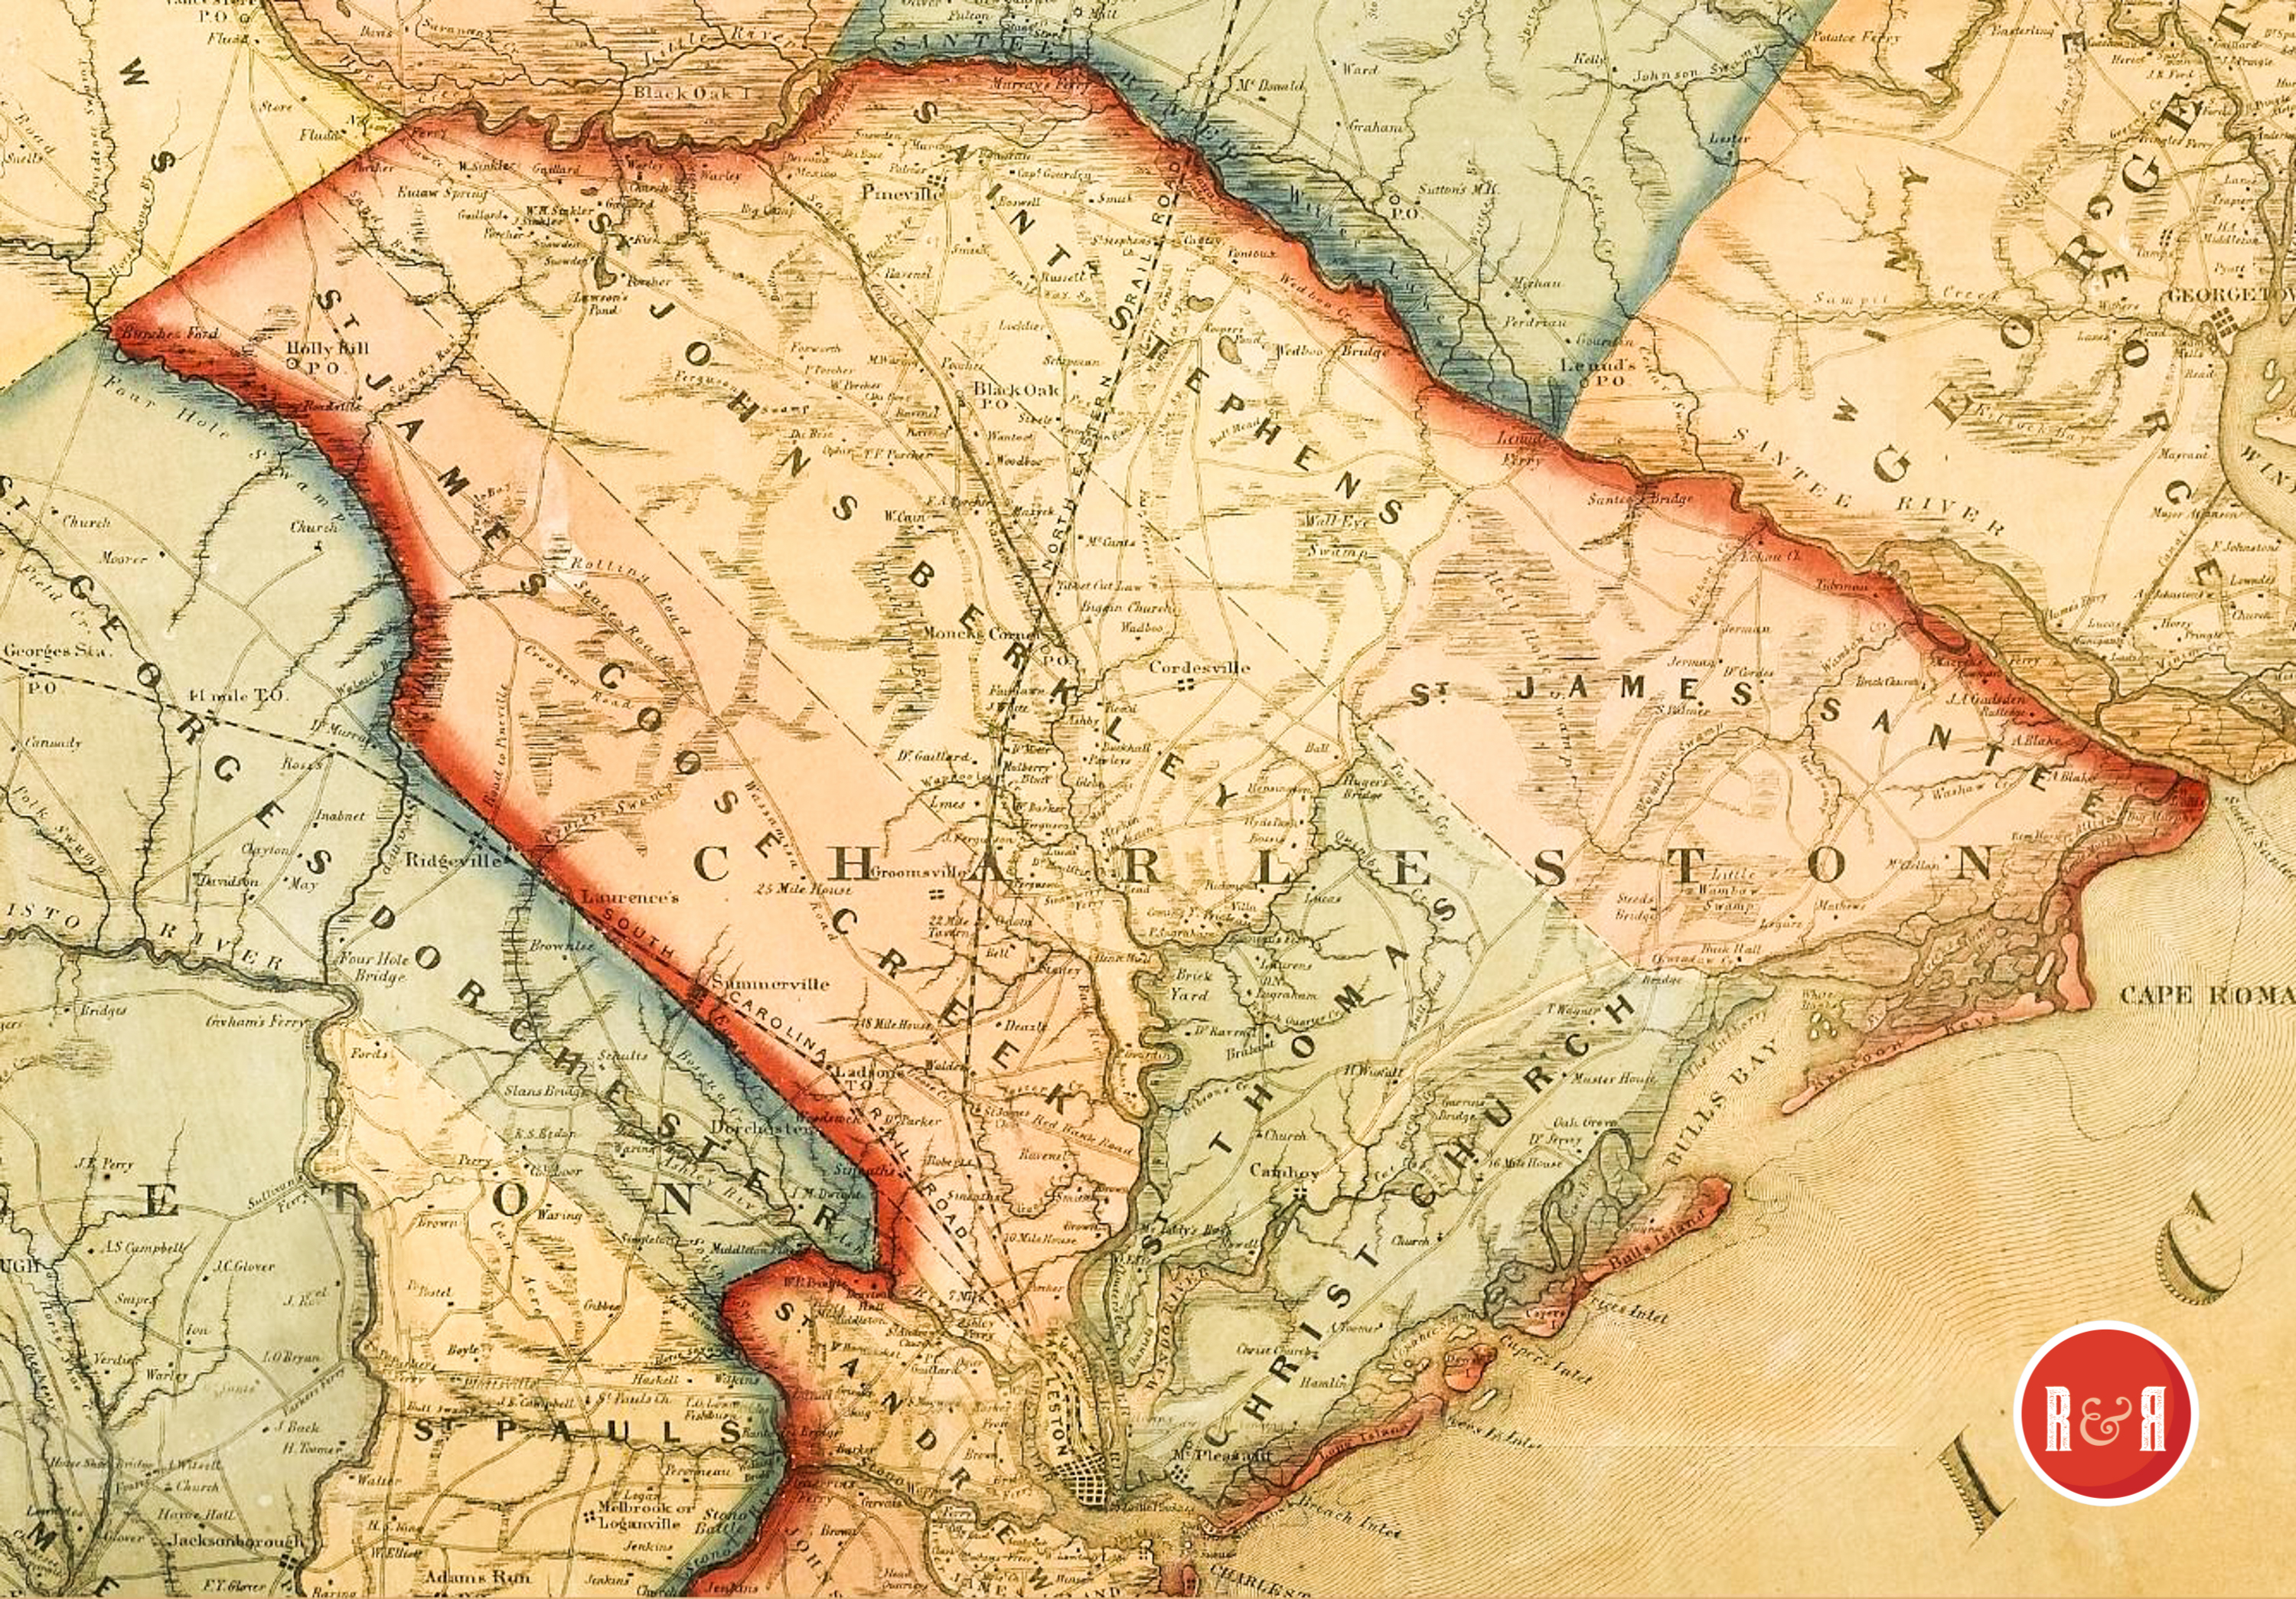 COLTON'S 1854 MAP OF CHARLESTON COUNTY - SECTION I